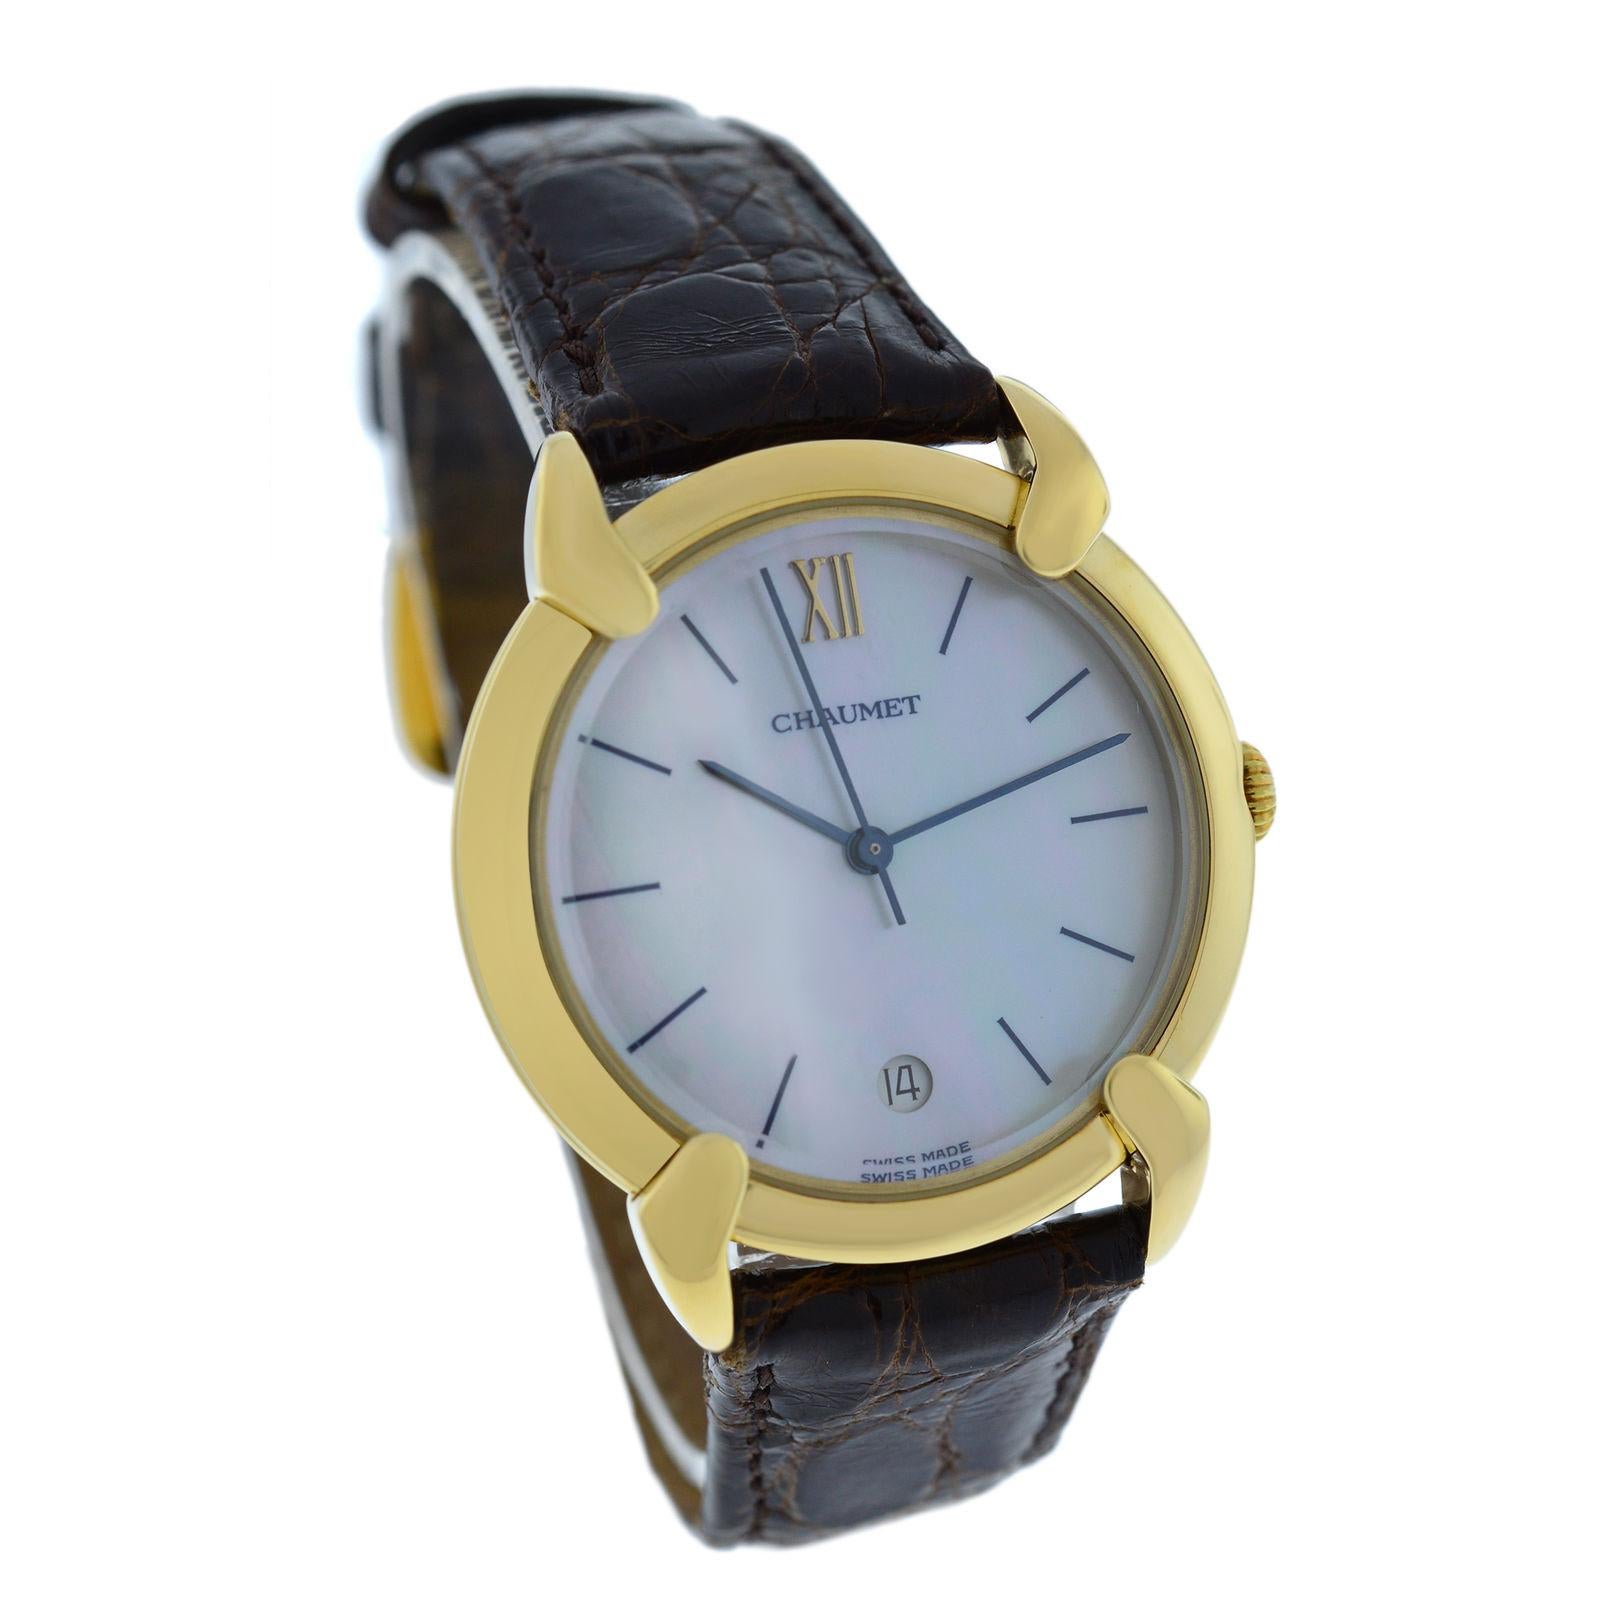 Brand	Chaumet
Model	
Gender	Ladies
Condition	Pre - Owned
Movement	Quartz
Case Material	18K Yellow Gold 
Bracelet / Strap Material	Leather
Clasp / Buckle Material	18K Yellow Gold Plaque
Clasp Type	Tang
Bracelet / Strap width	17 mm at lugs
Total